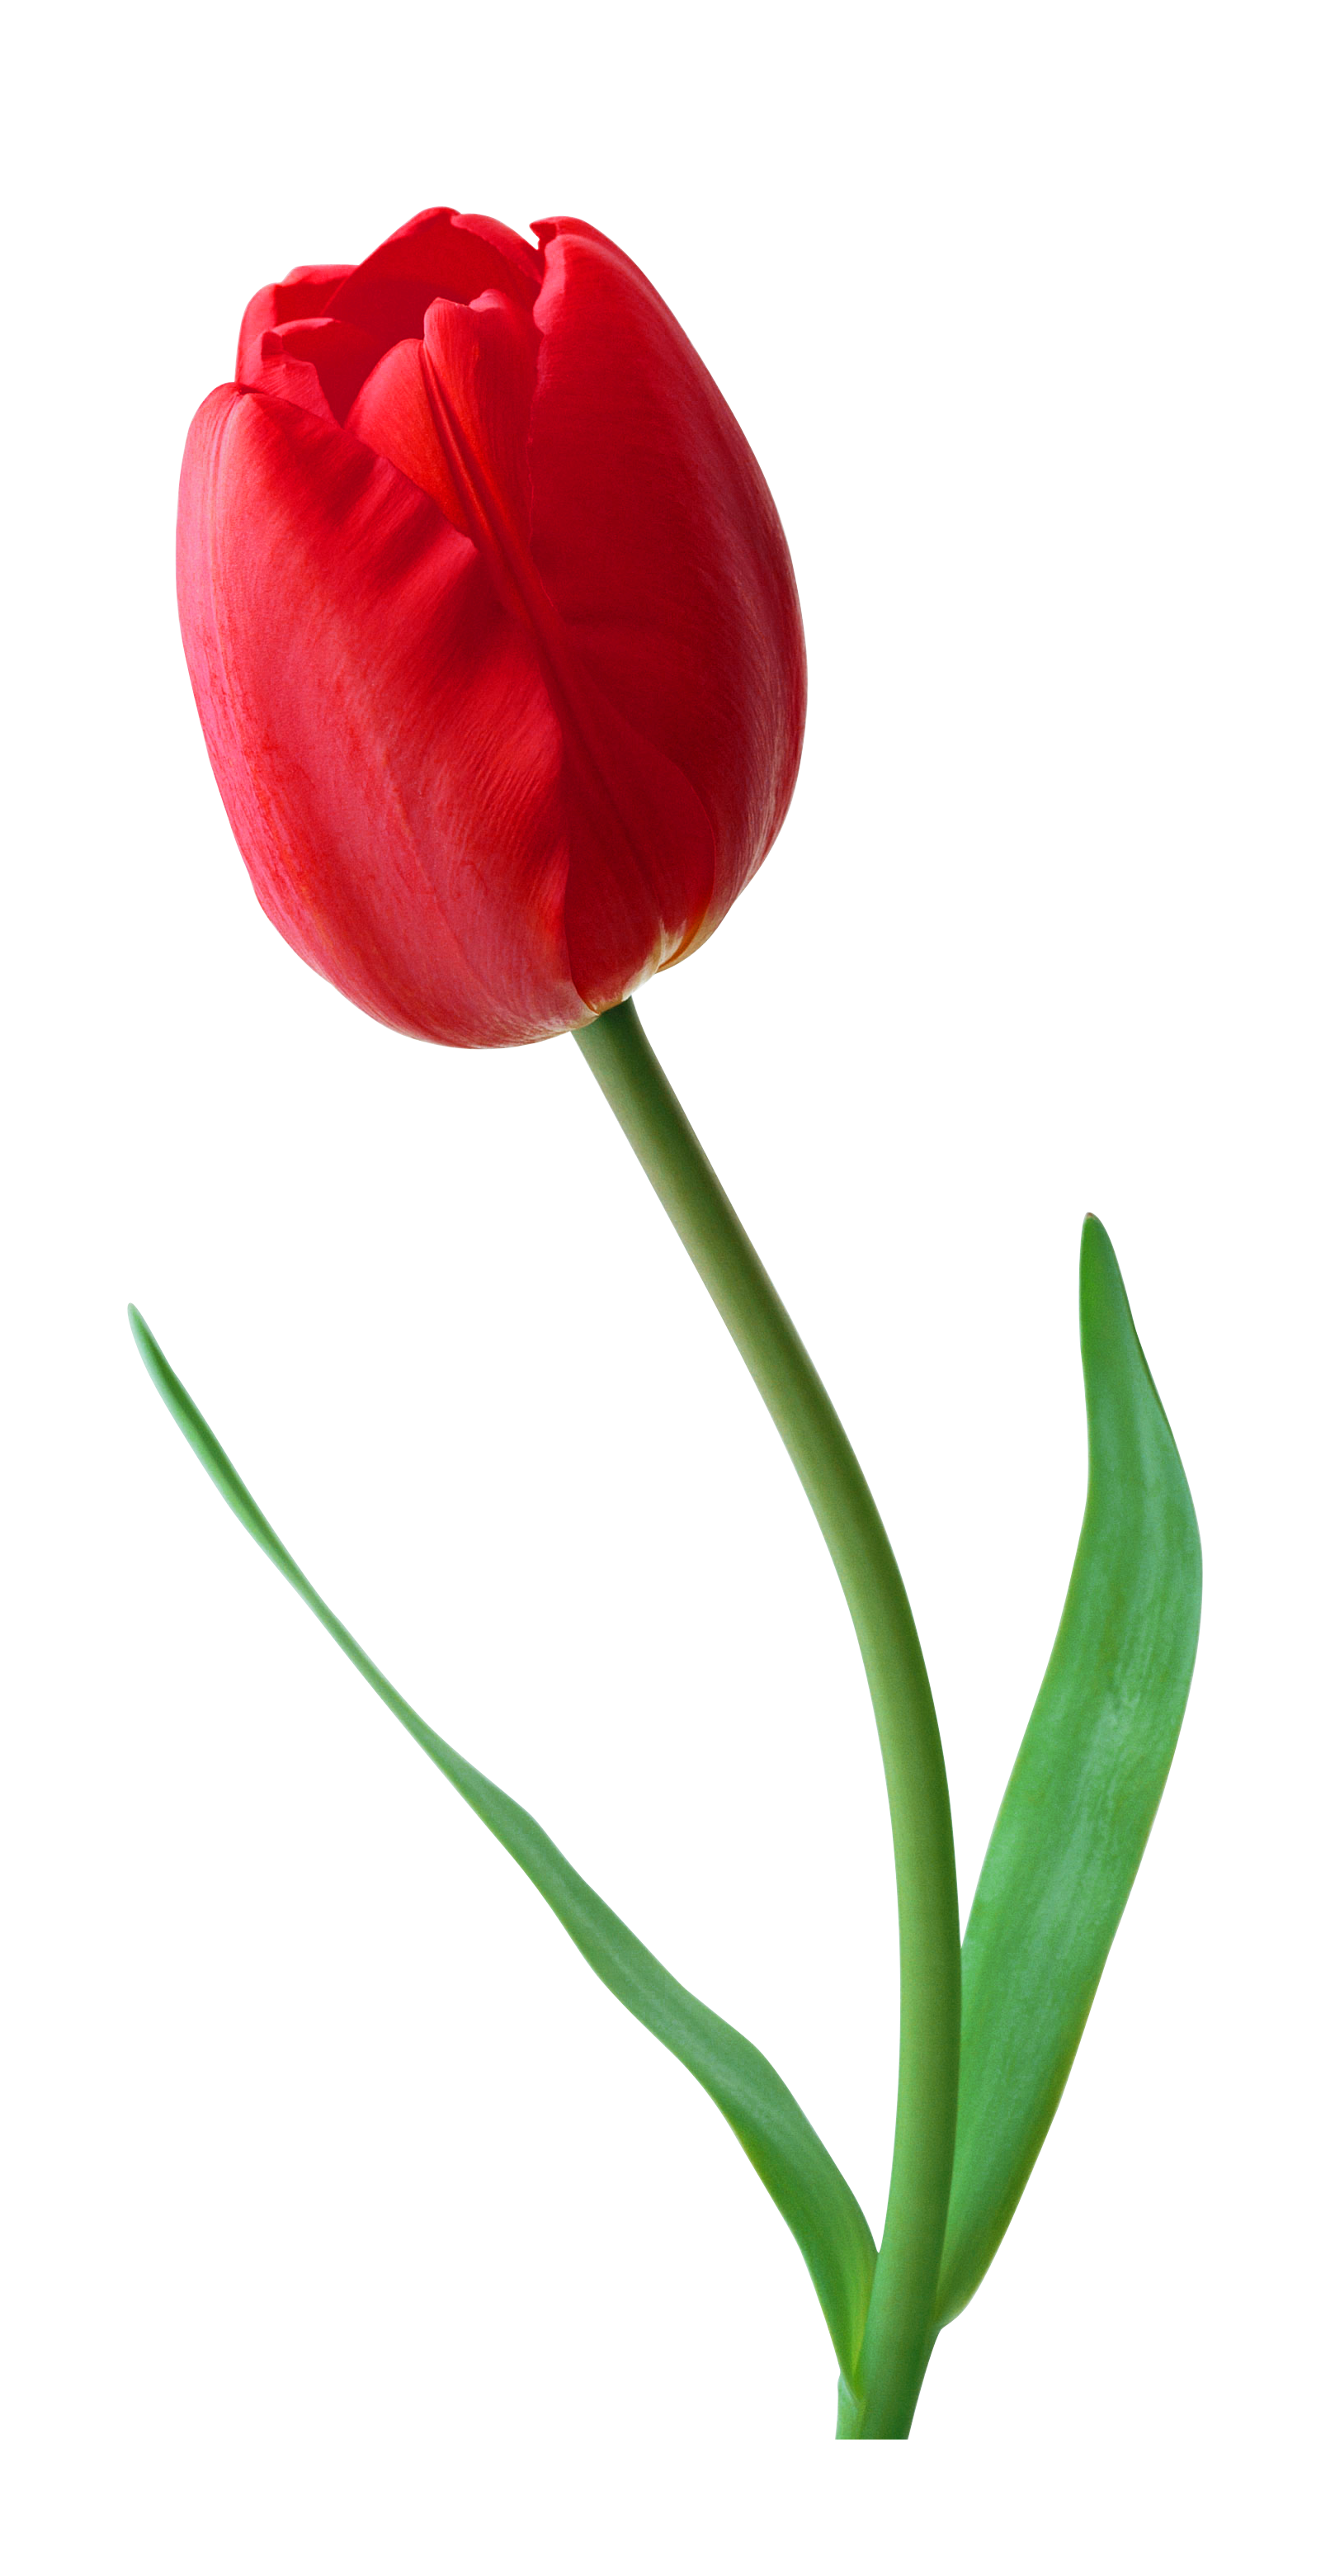 Tulip Flower PNG Image in High Definition